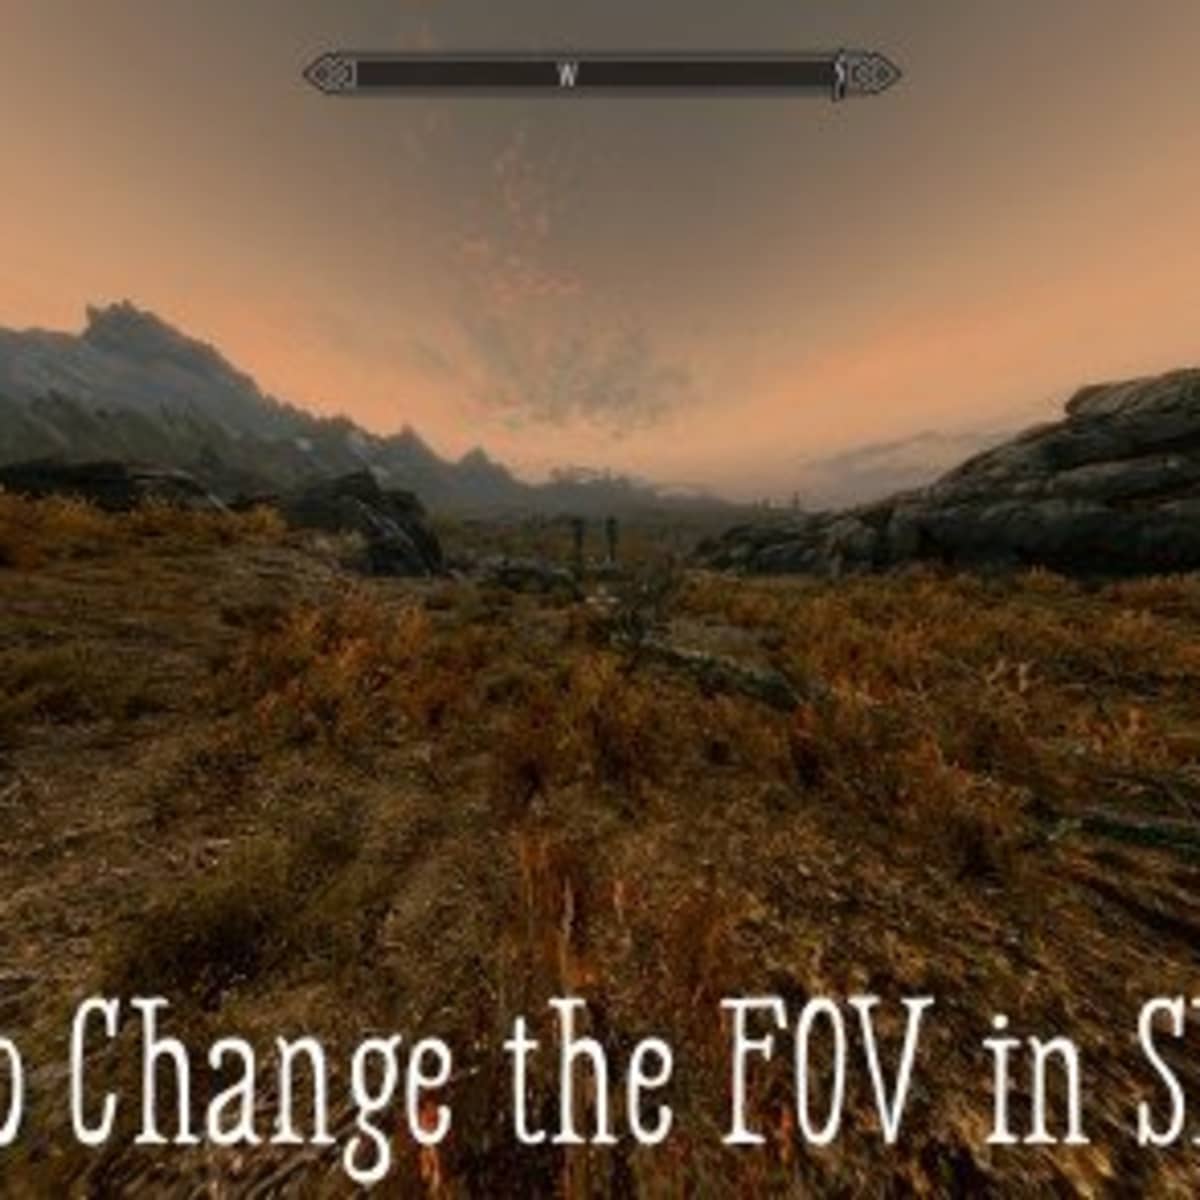 Bermad Monarchie noot How to Change the FOV in "Skyrim" - LevelSkip